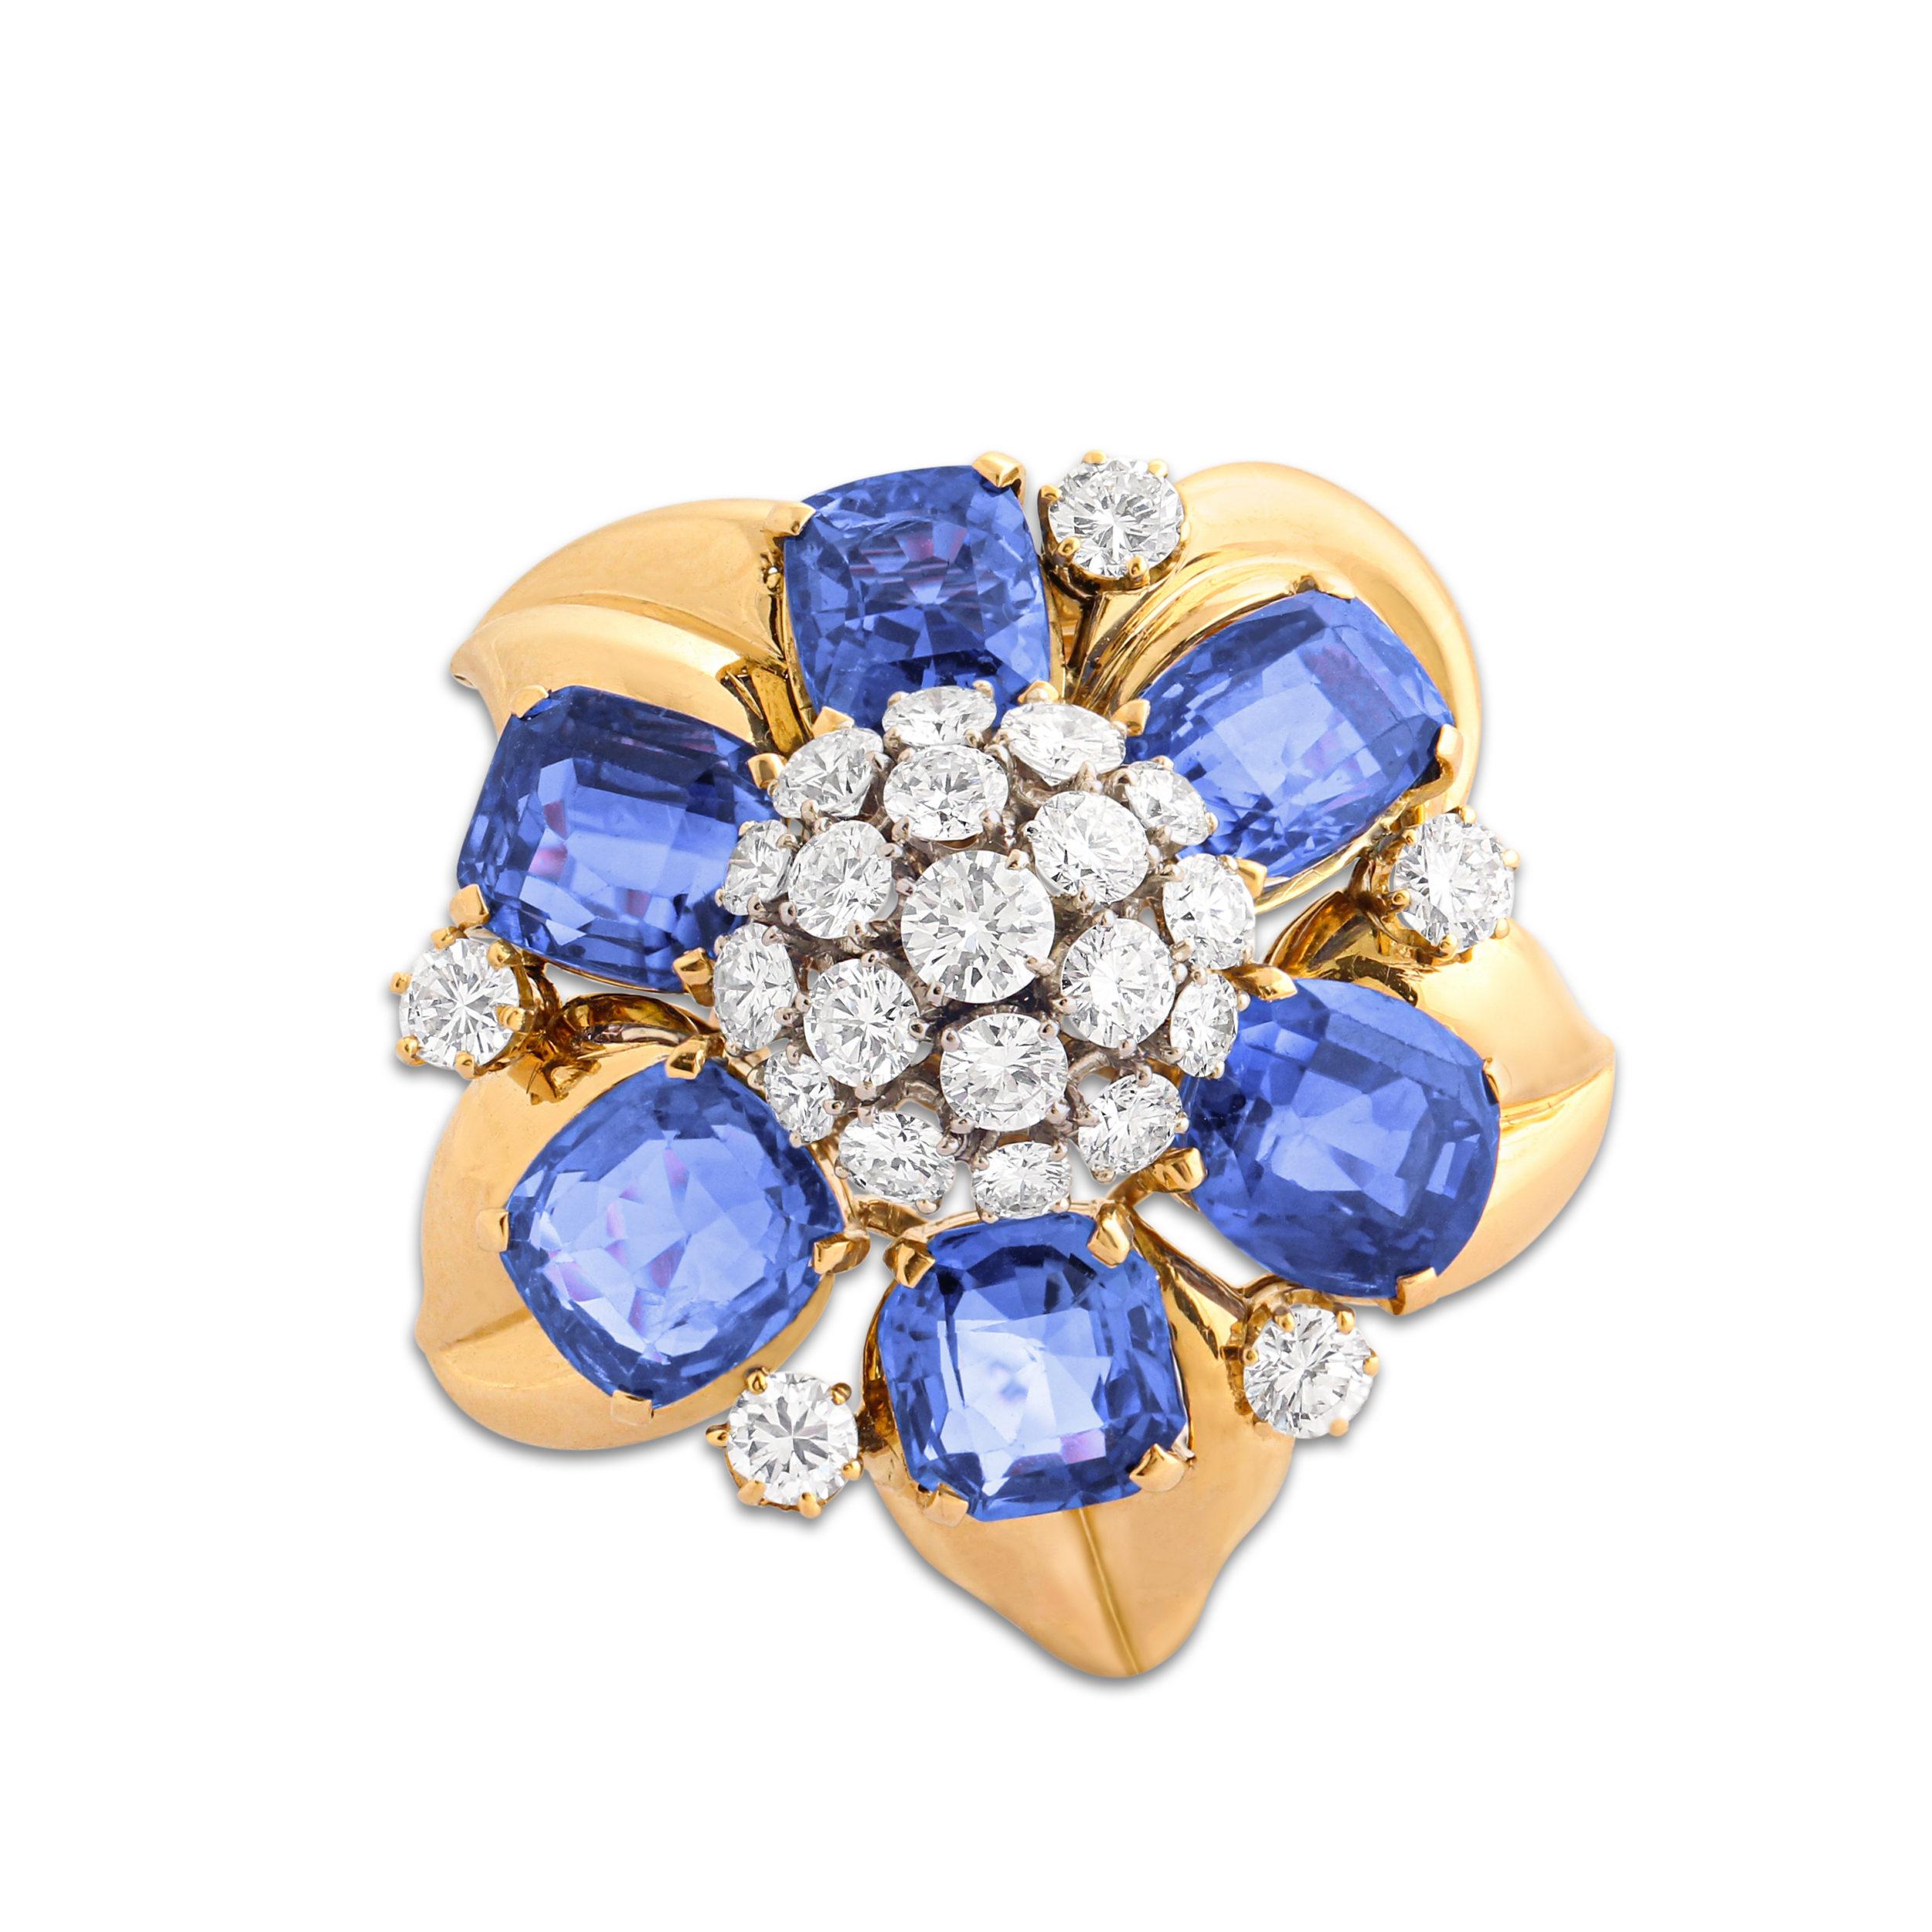 An 18k gold, sapphire and diamond flower brooch by Bulgari. Set with six cushion-cut sapphires around a cluster of round-cut diamonds. Total sapphire weight = 16 carats, total diamond weight = 2.50 carats